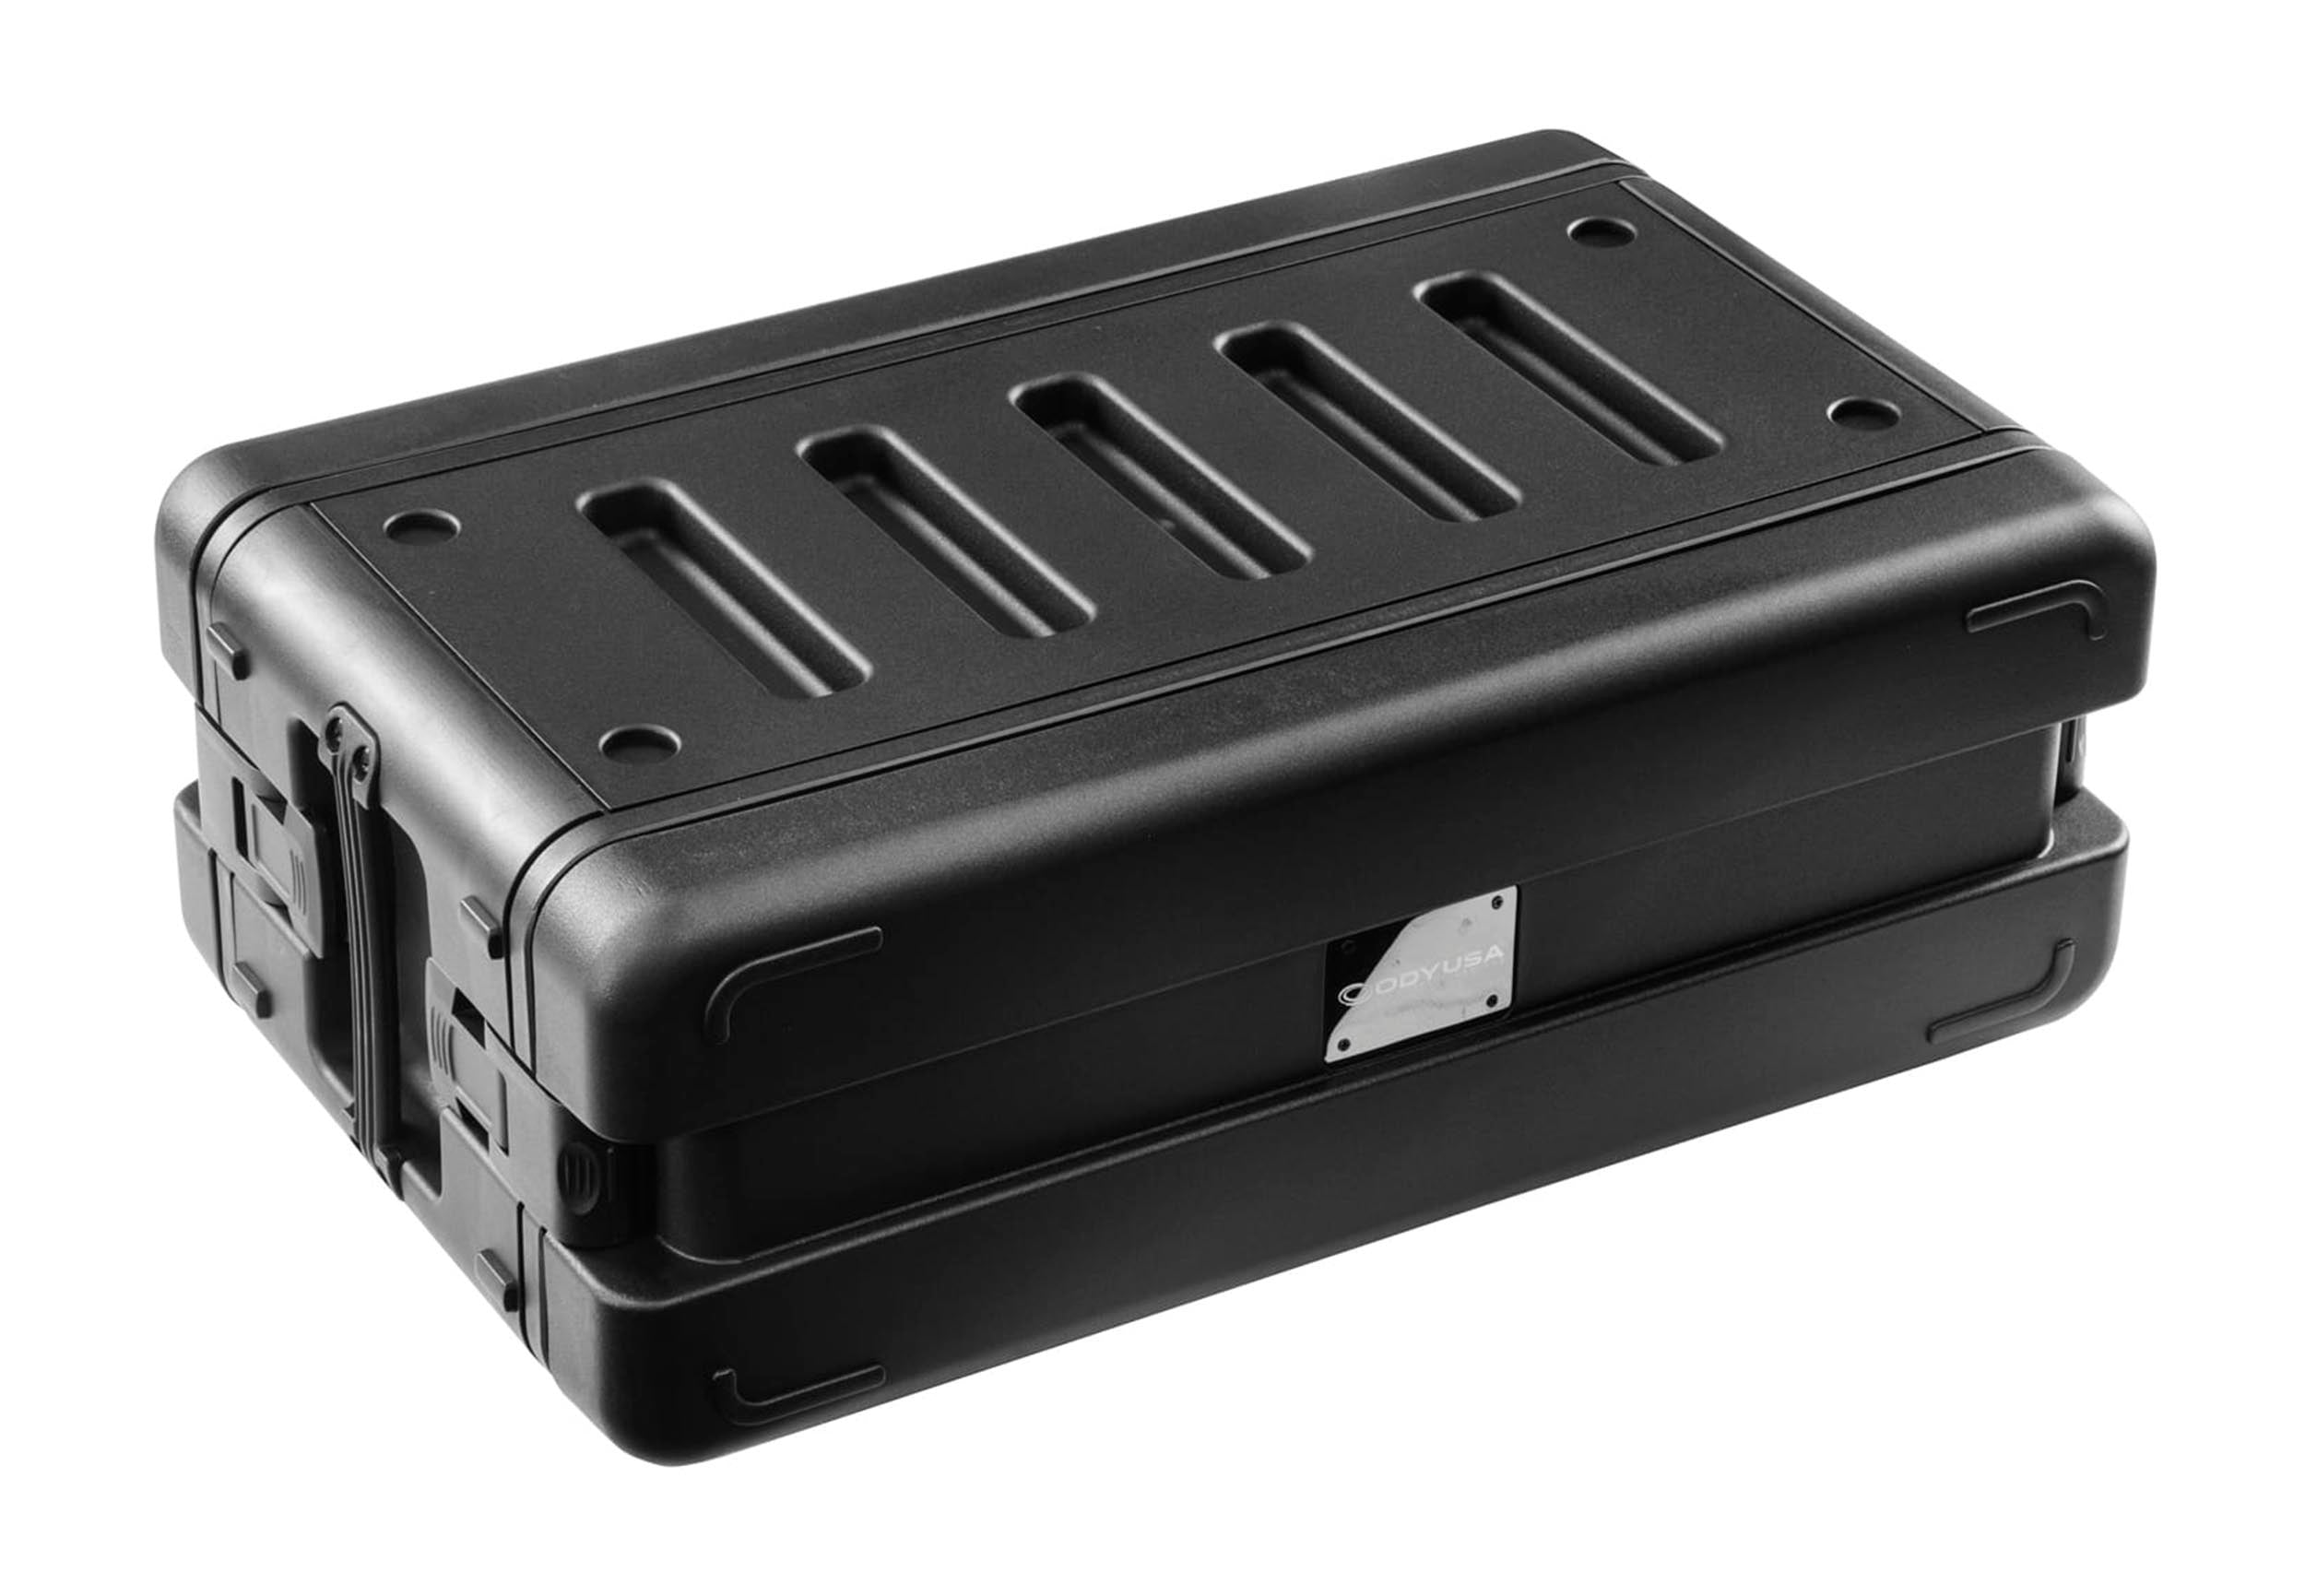 Odyssey VR3XS, 10.5-Inch Front Rail to Rear Lid Watertight Dust-proof Injection-Molded 3U Rack Case Odyssey